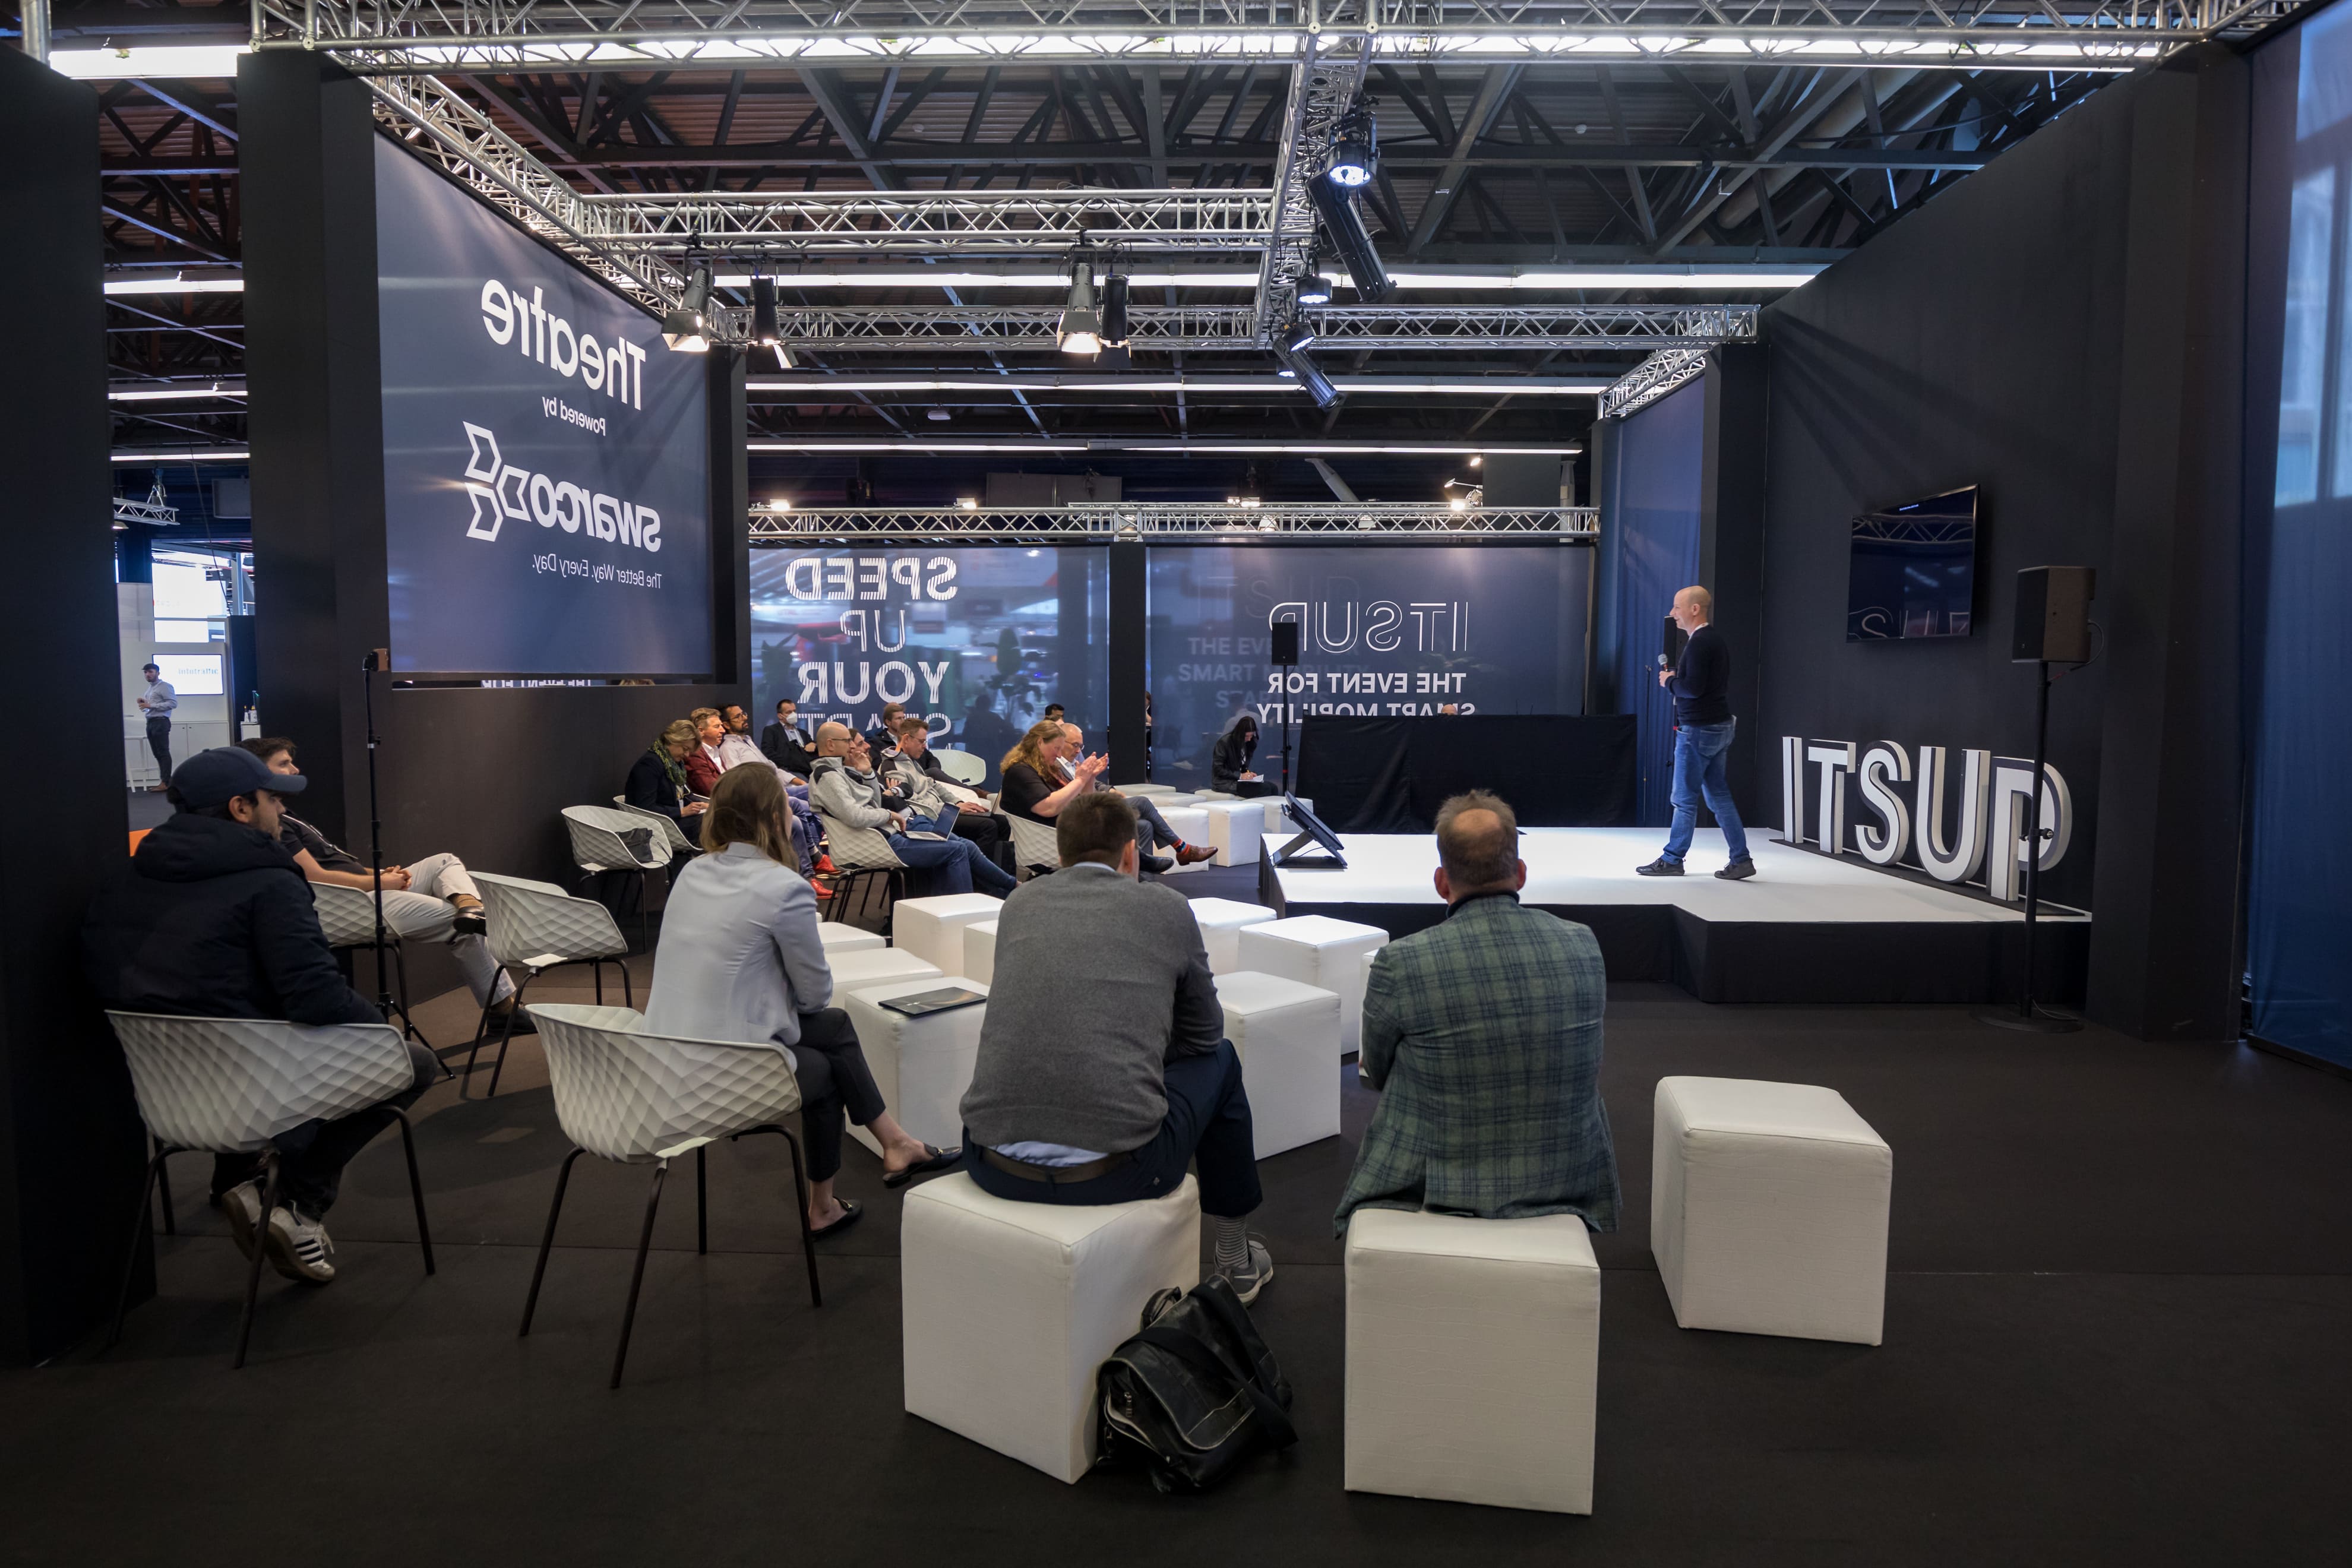 Enter ITSUP, the exclusive platform for exposure at Intertraffic Amsterdam.